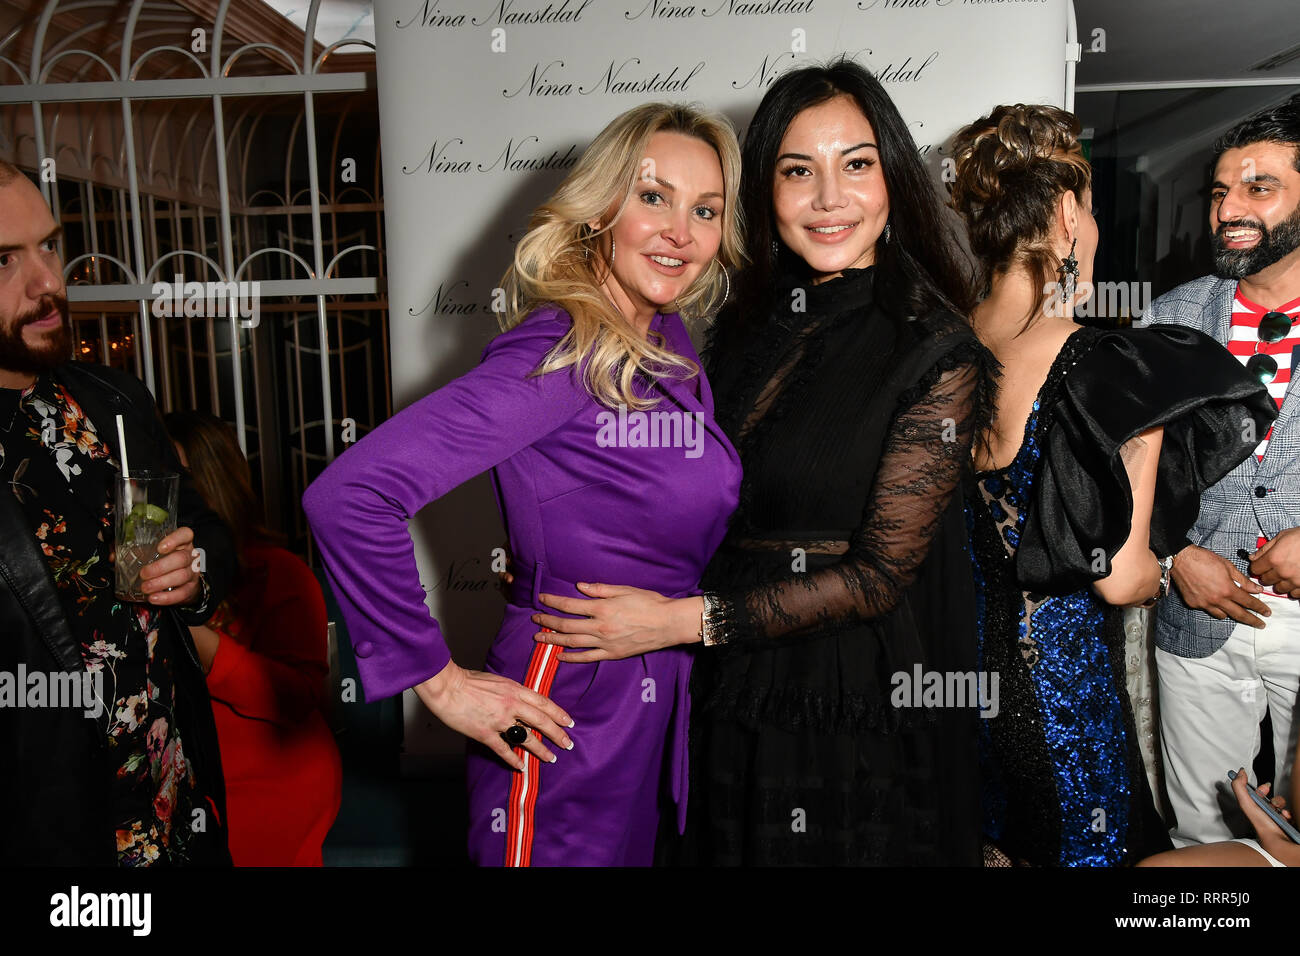 London, UK. 26th Feb 2019. Heather Bird Tchenguiz and Elaine Zhang attend Nina Naustdal catwalk show SS19/20 collection by The London School of Beauty & Make-up at Bagatelle on 26 Feb 2019, London, UK. Credit: Picture Capital/Alamy Live News Stock Photo